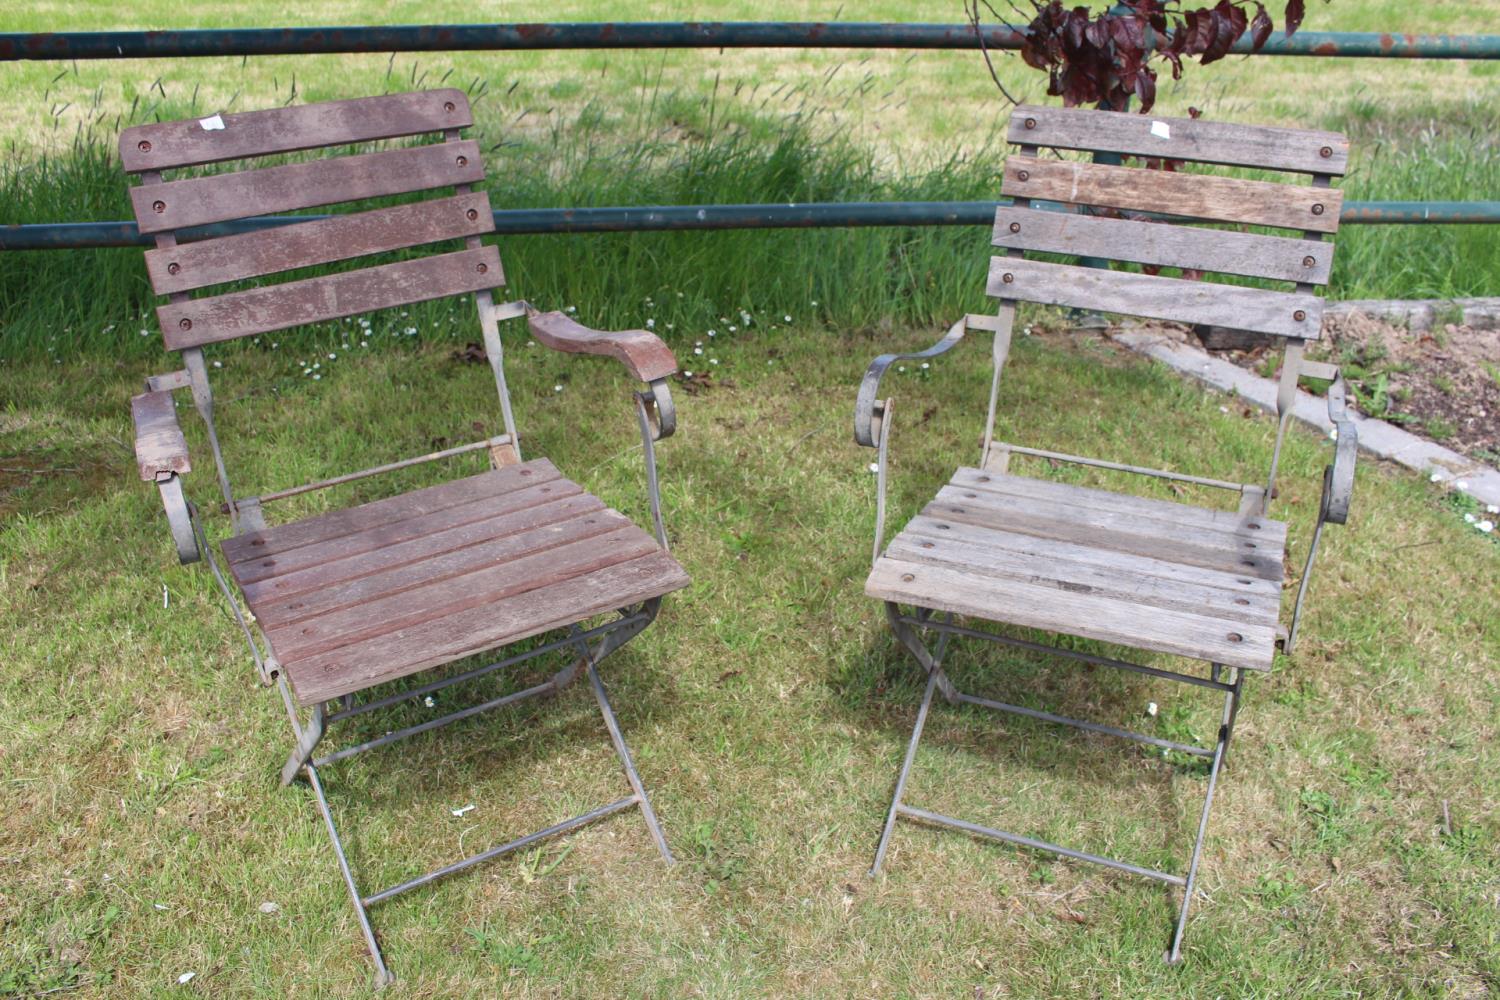 Pair of wrought iron and wooden garden chairs.